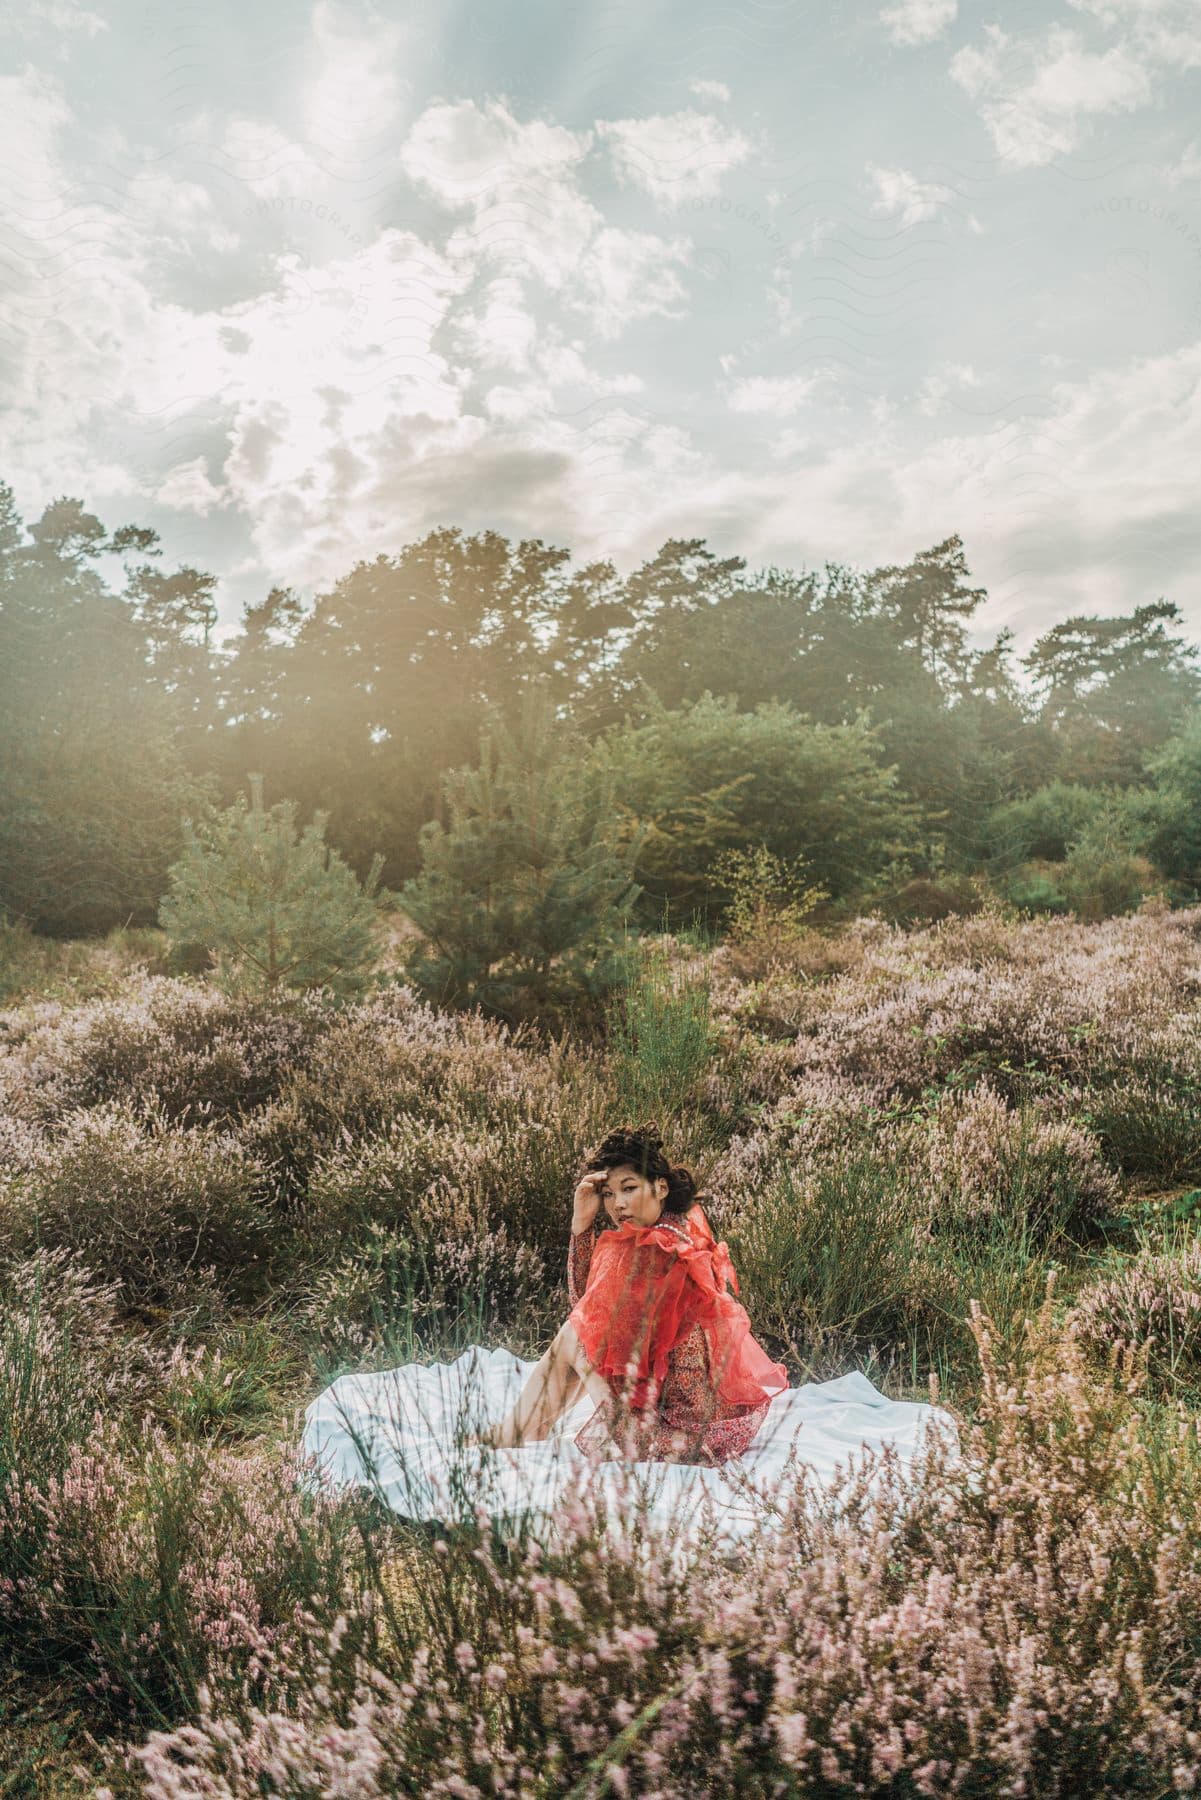 Woman sits over a blanket surrounded by wild flowers